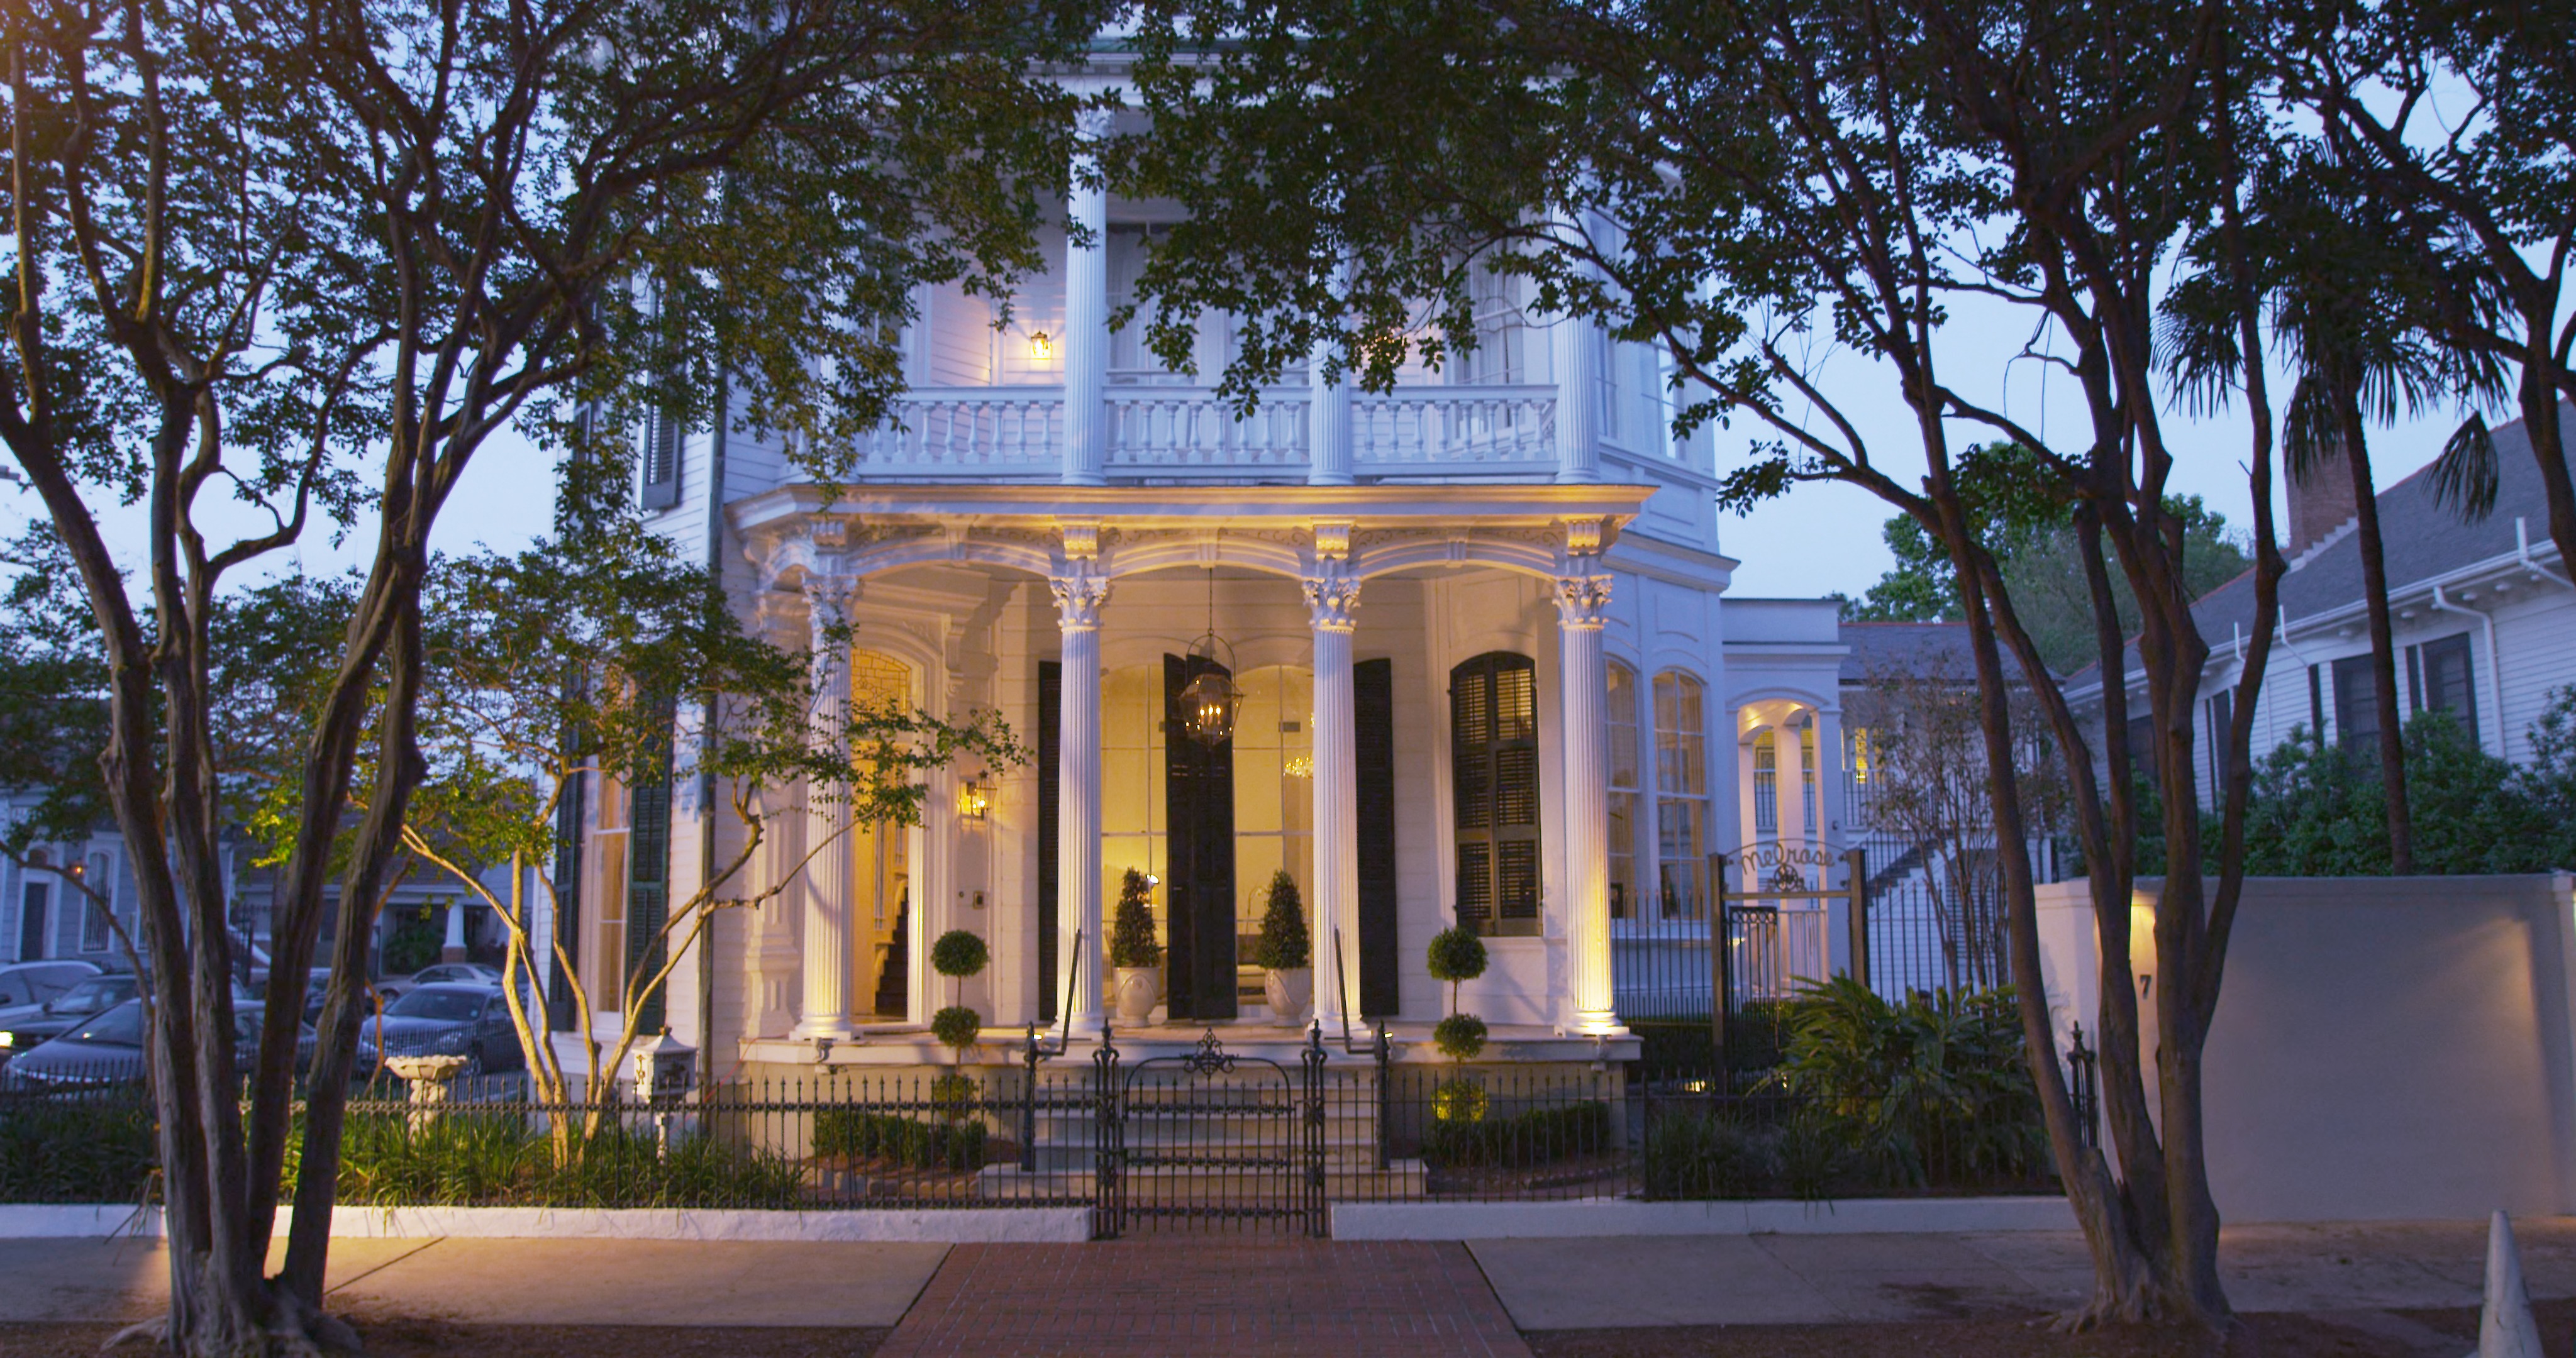 Where To Stay in New Orleans: Top Neighborhoods To Visit